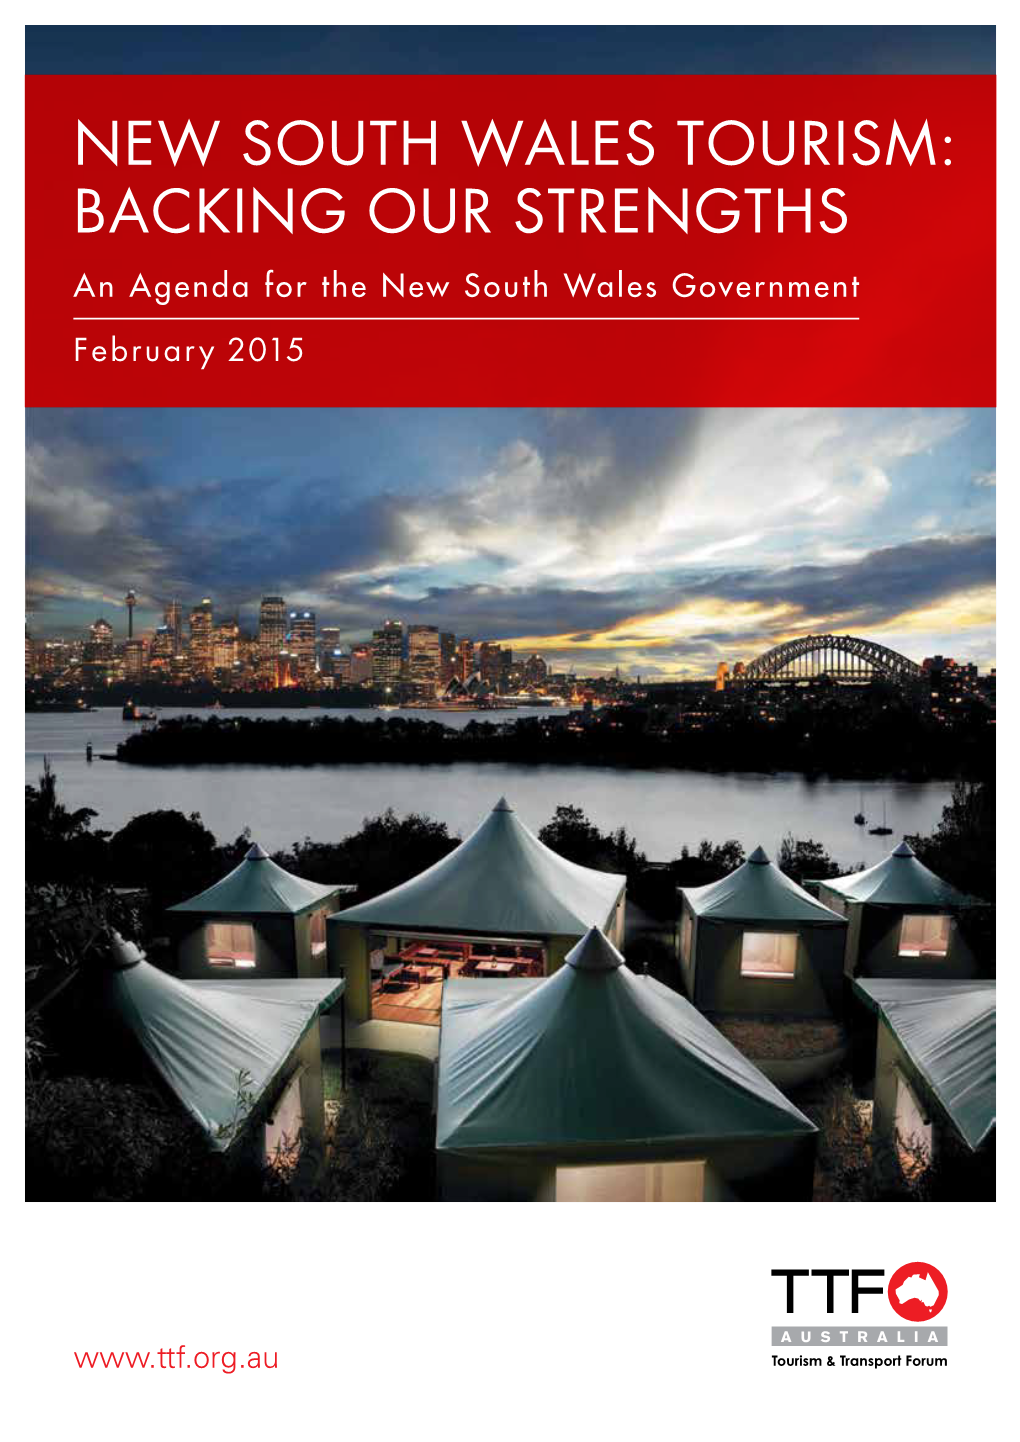 New South Wales Tourism: Backing Our Strengths an Agenda for the New South Wales Government